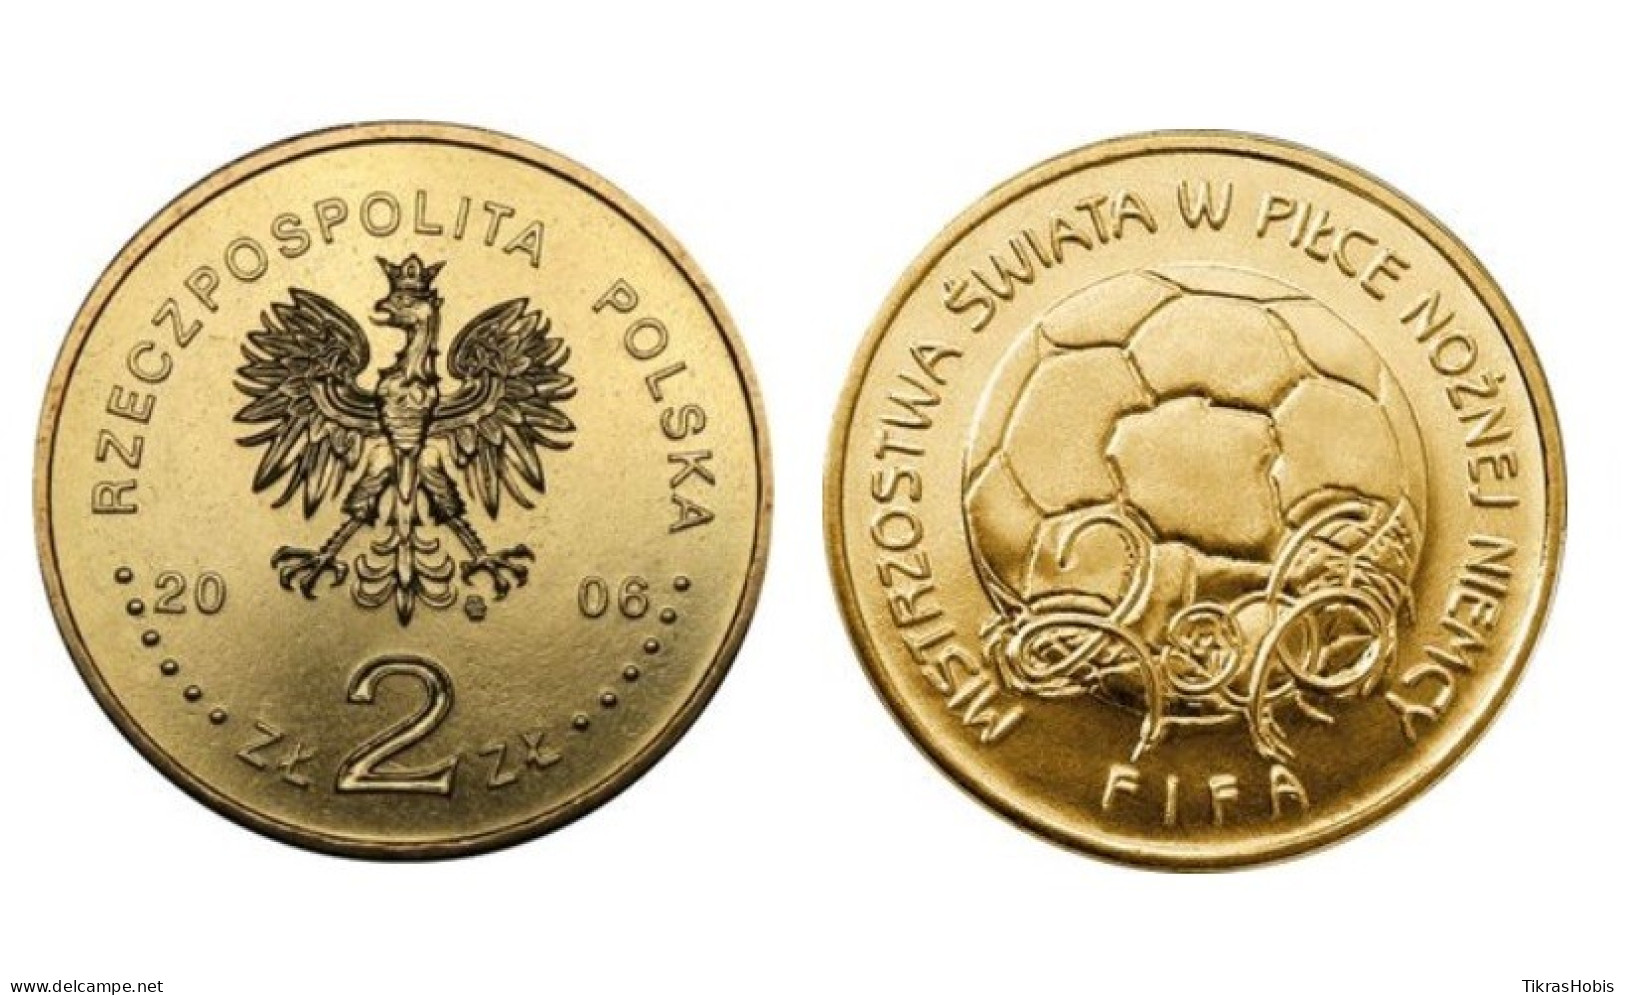 Poland 2 Zloty 2006 FIFA World Cup Y606 - Pologne